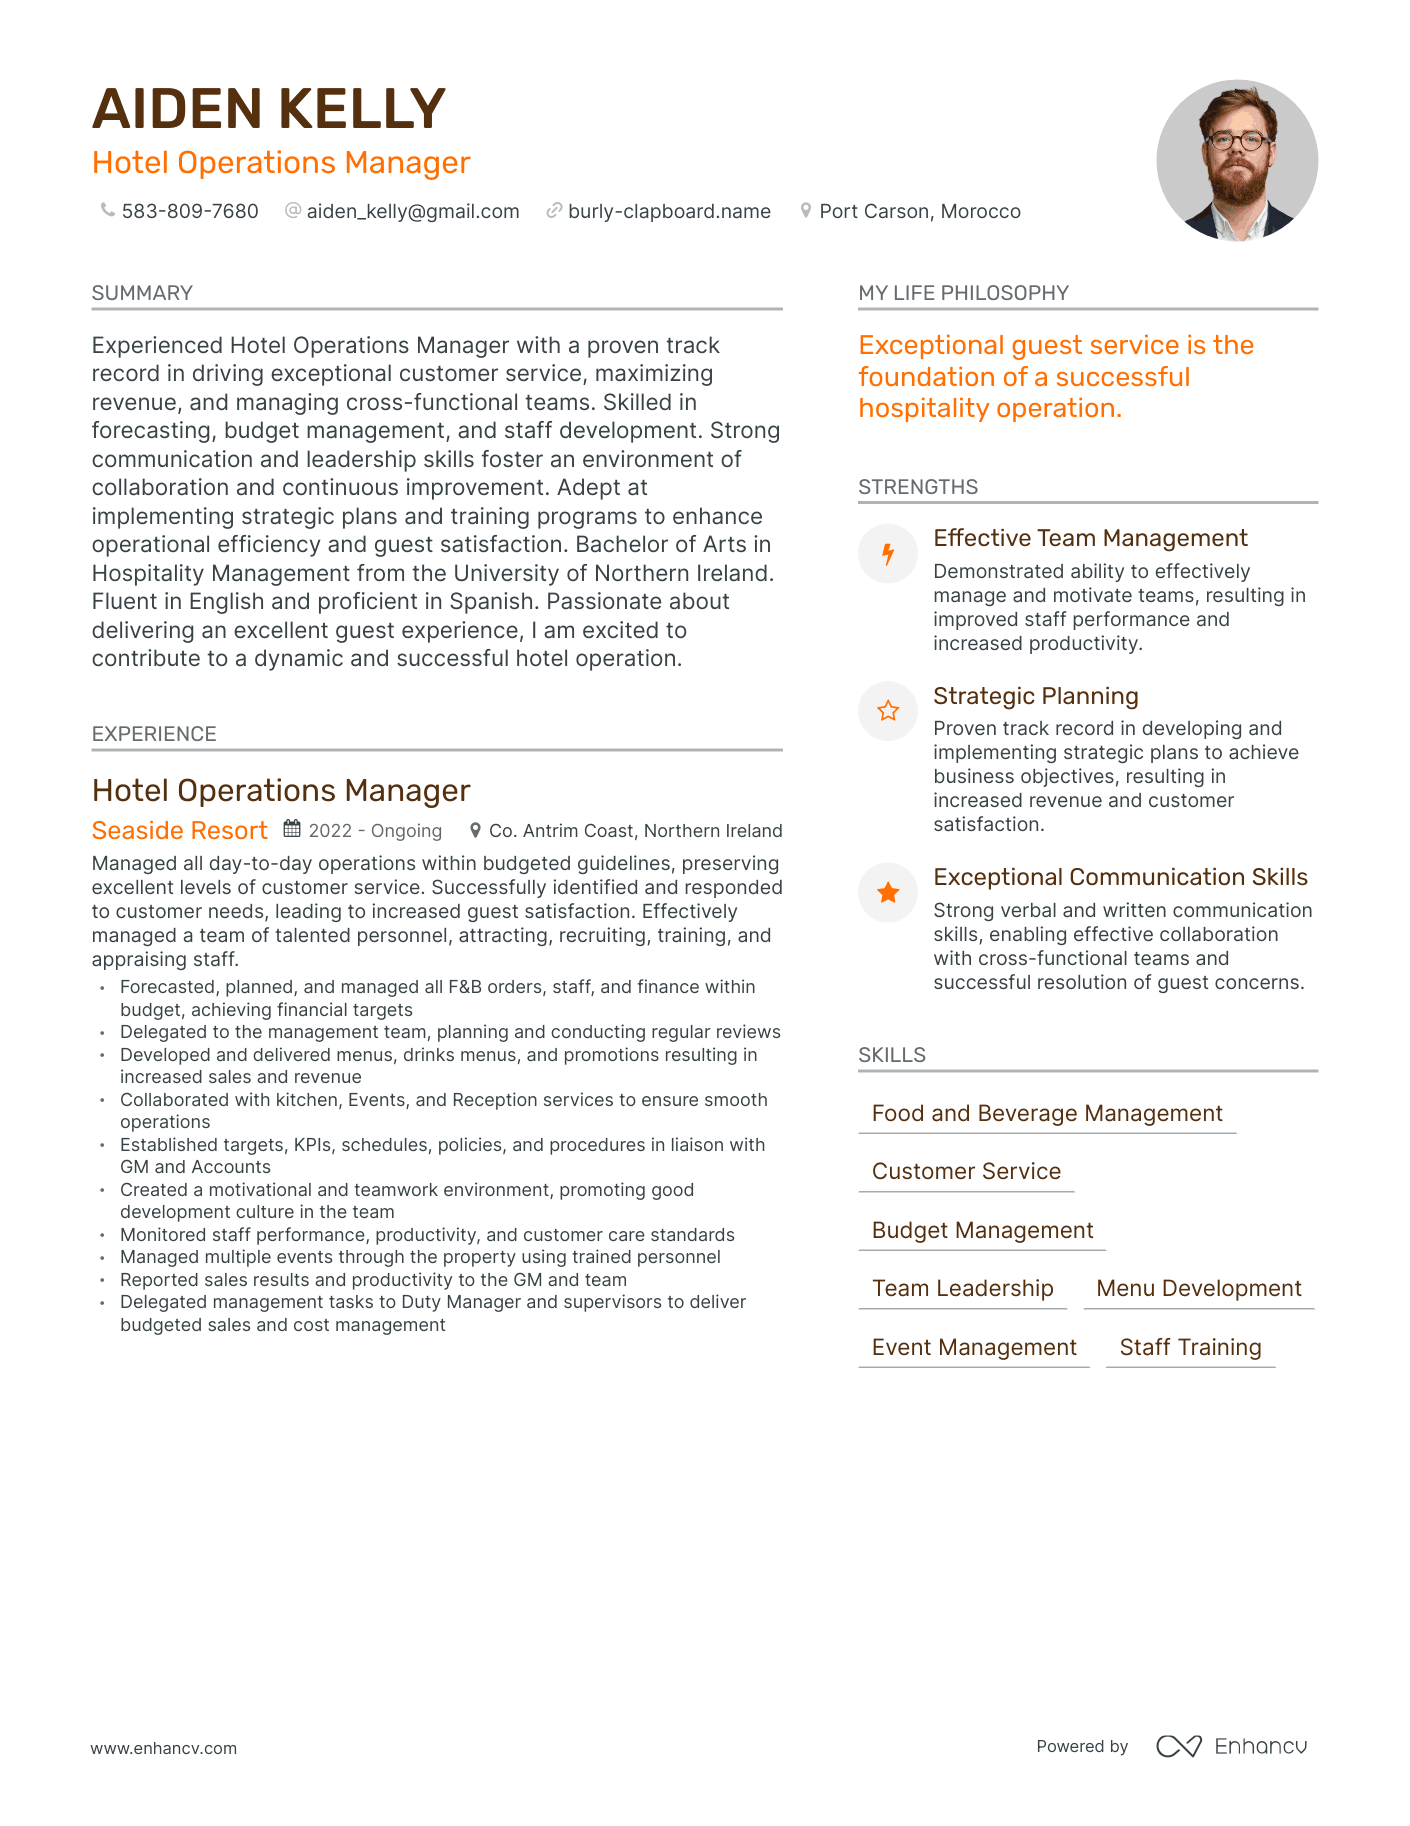 Hotel Operations Manager resume example